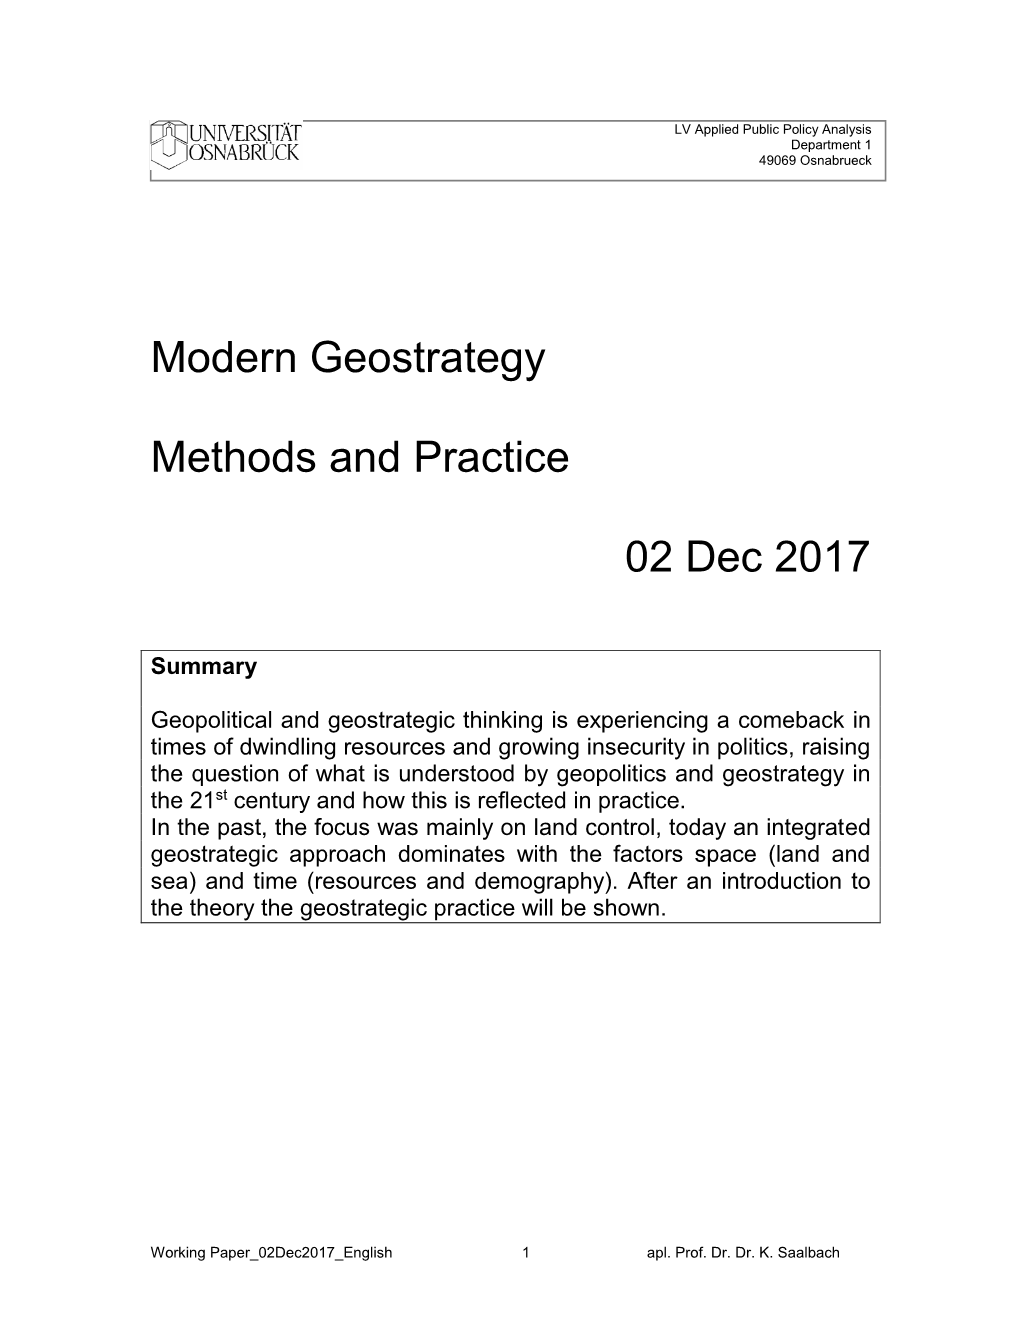 Modern Geostrategy Methods and Practice 02 Dec 2017